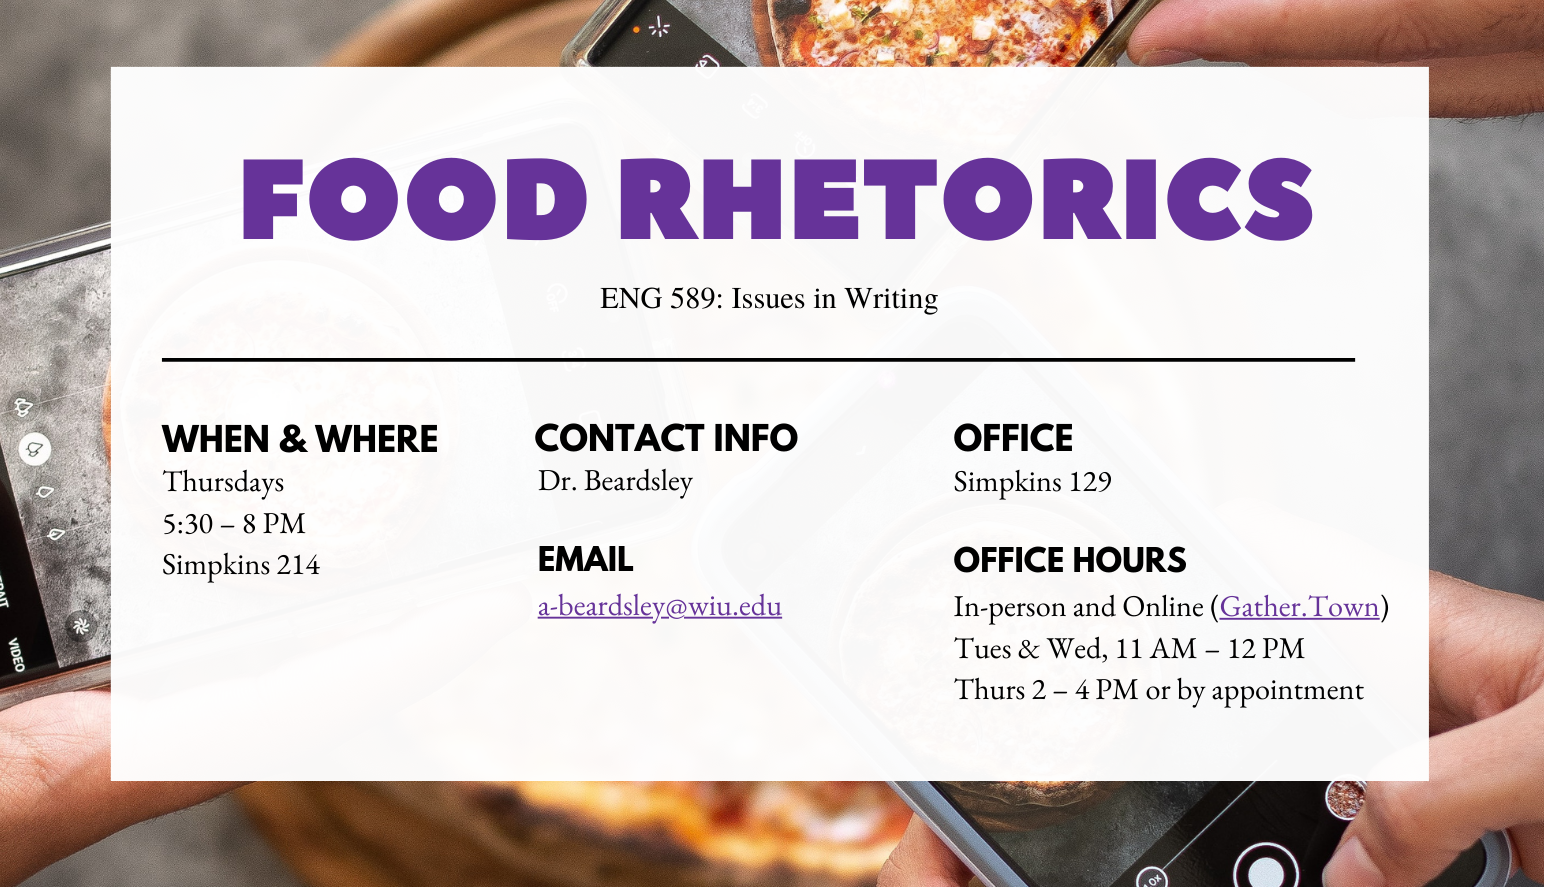 The header for a food rhetorics course that includes the following essential class information: ENG 589: Issues in Writing. When and where: Tuesdays, 5:30-8 PM, Simpkins 214. Contact info: Dr. Beardsley, email: a-beardsley@wiu.edu. Office: Simpkins 129. Office hours: in-person and online on Gather.Town, Tues. and Wed., 11 AM-12 PM, Thurs., 2-4 PM or by appointment